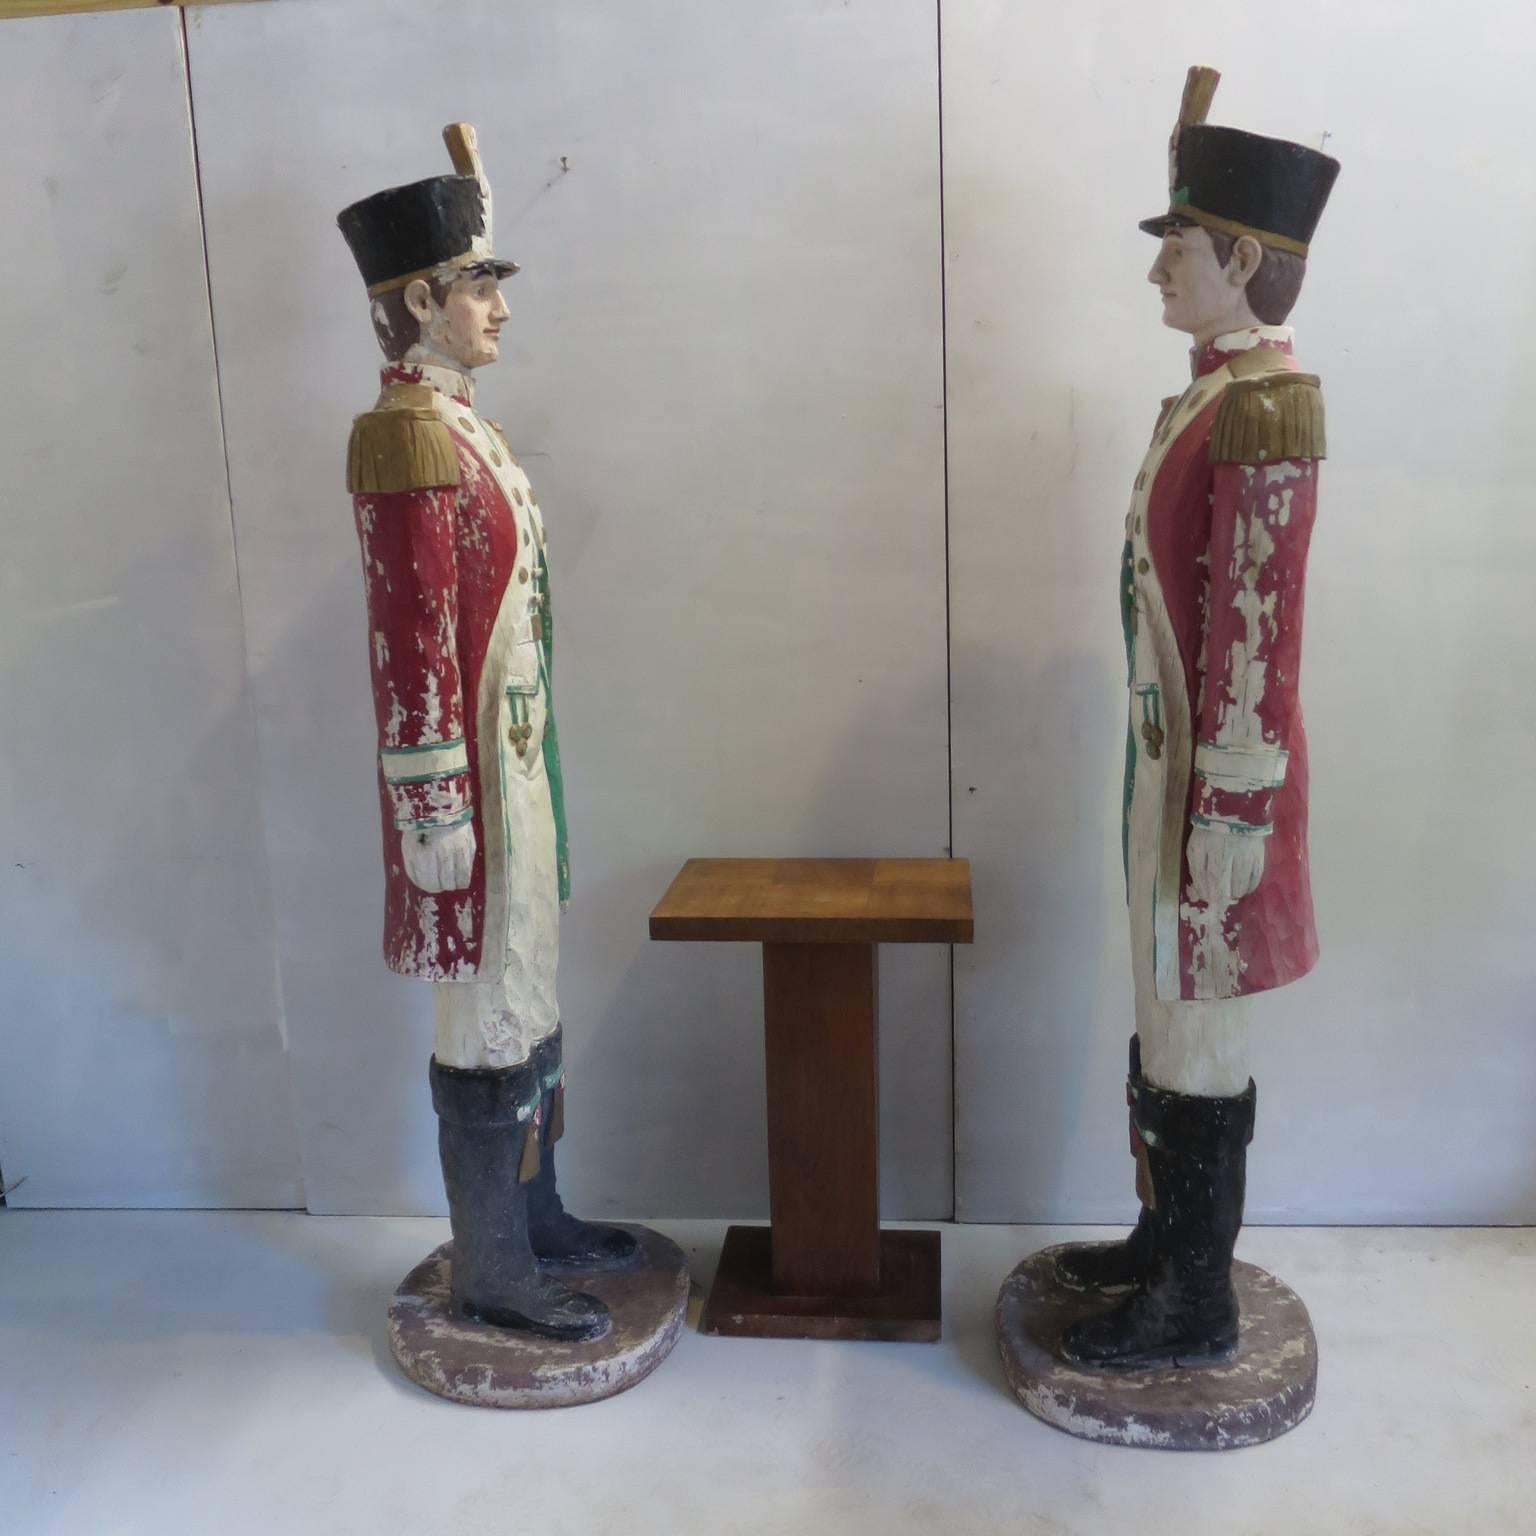 Mid-Century Modern Pair of Handsome Lifesize Military Guards in Uniform Midcentury Sculptures